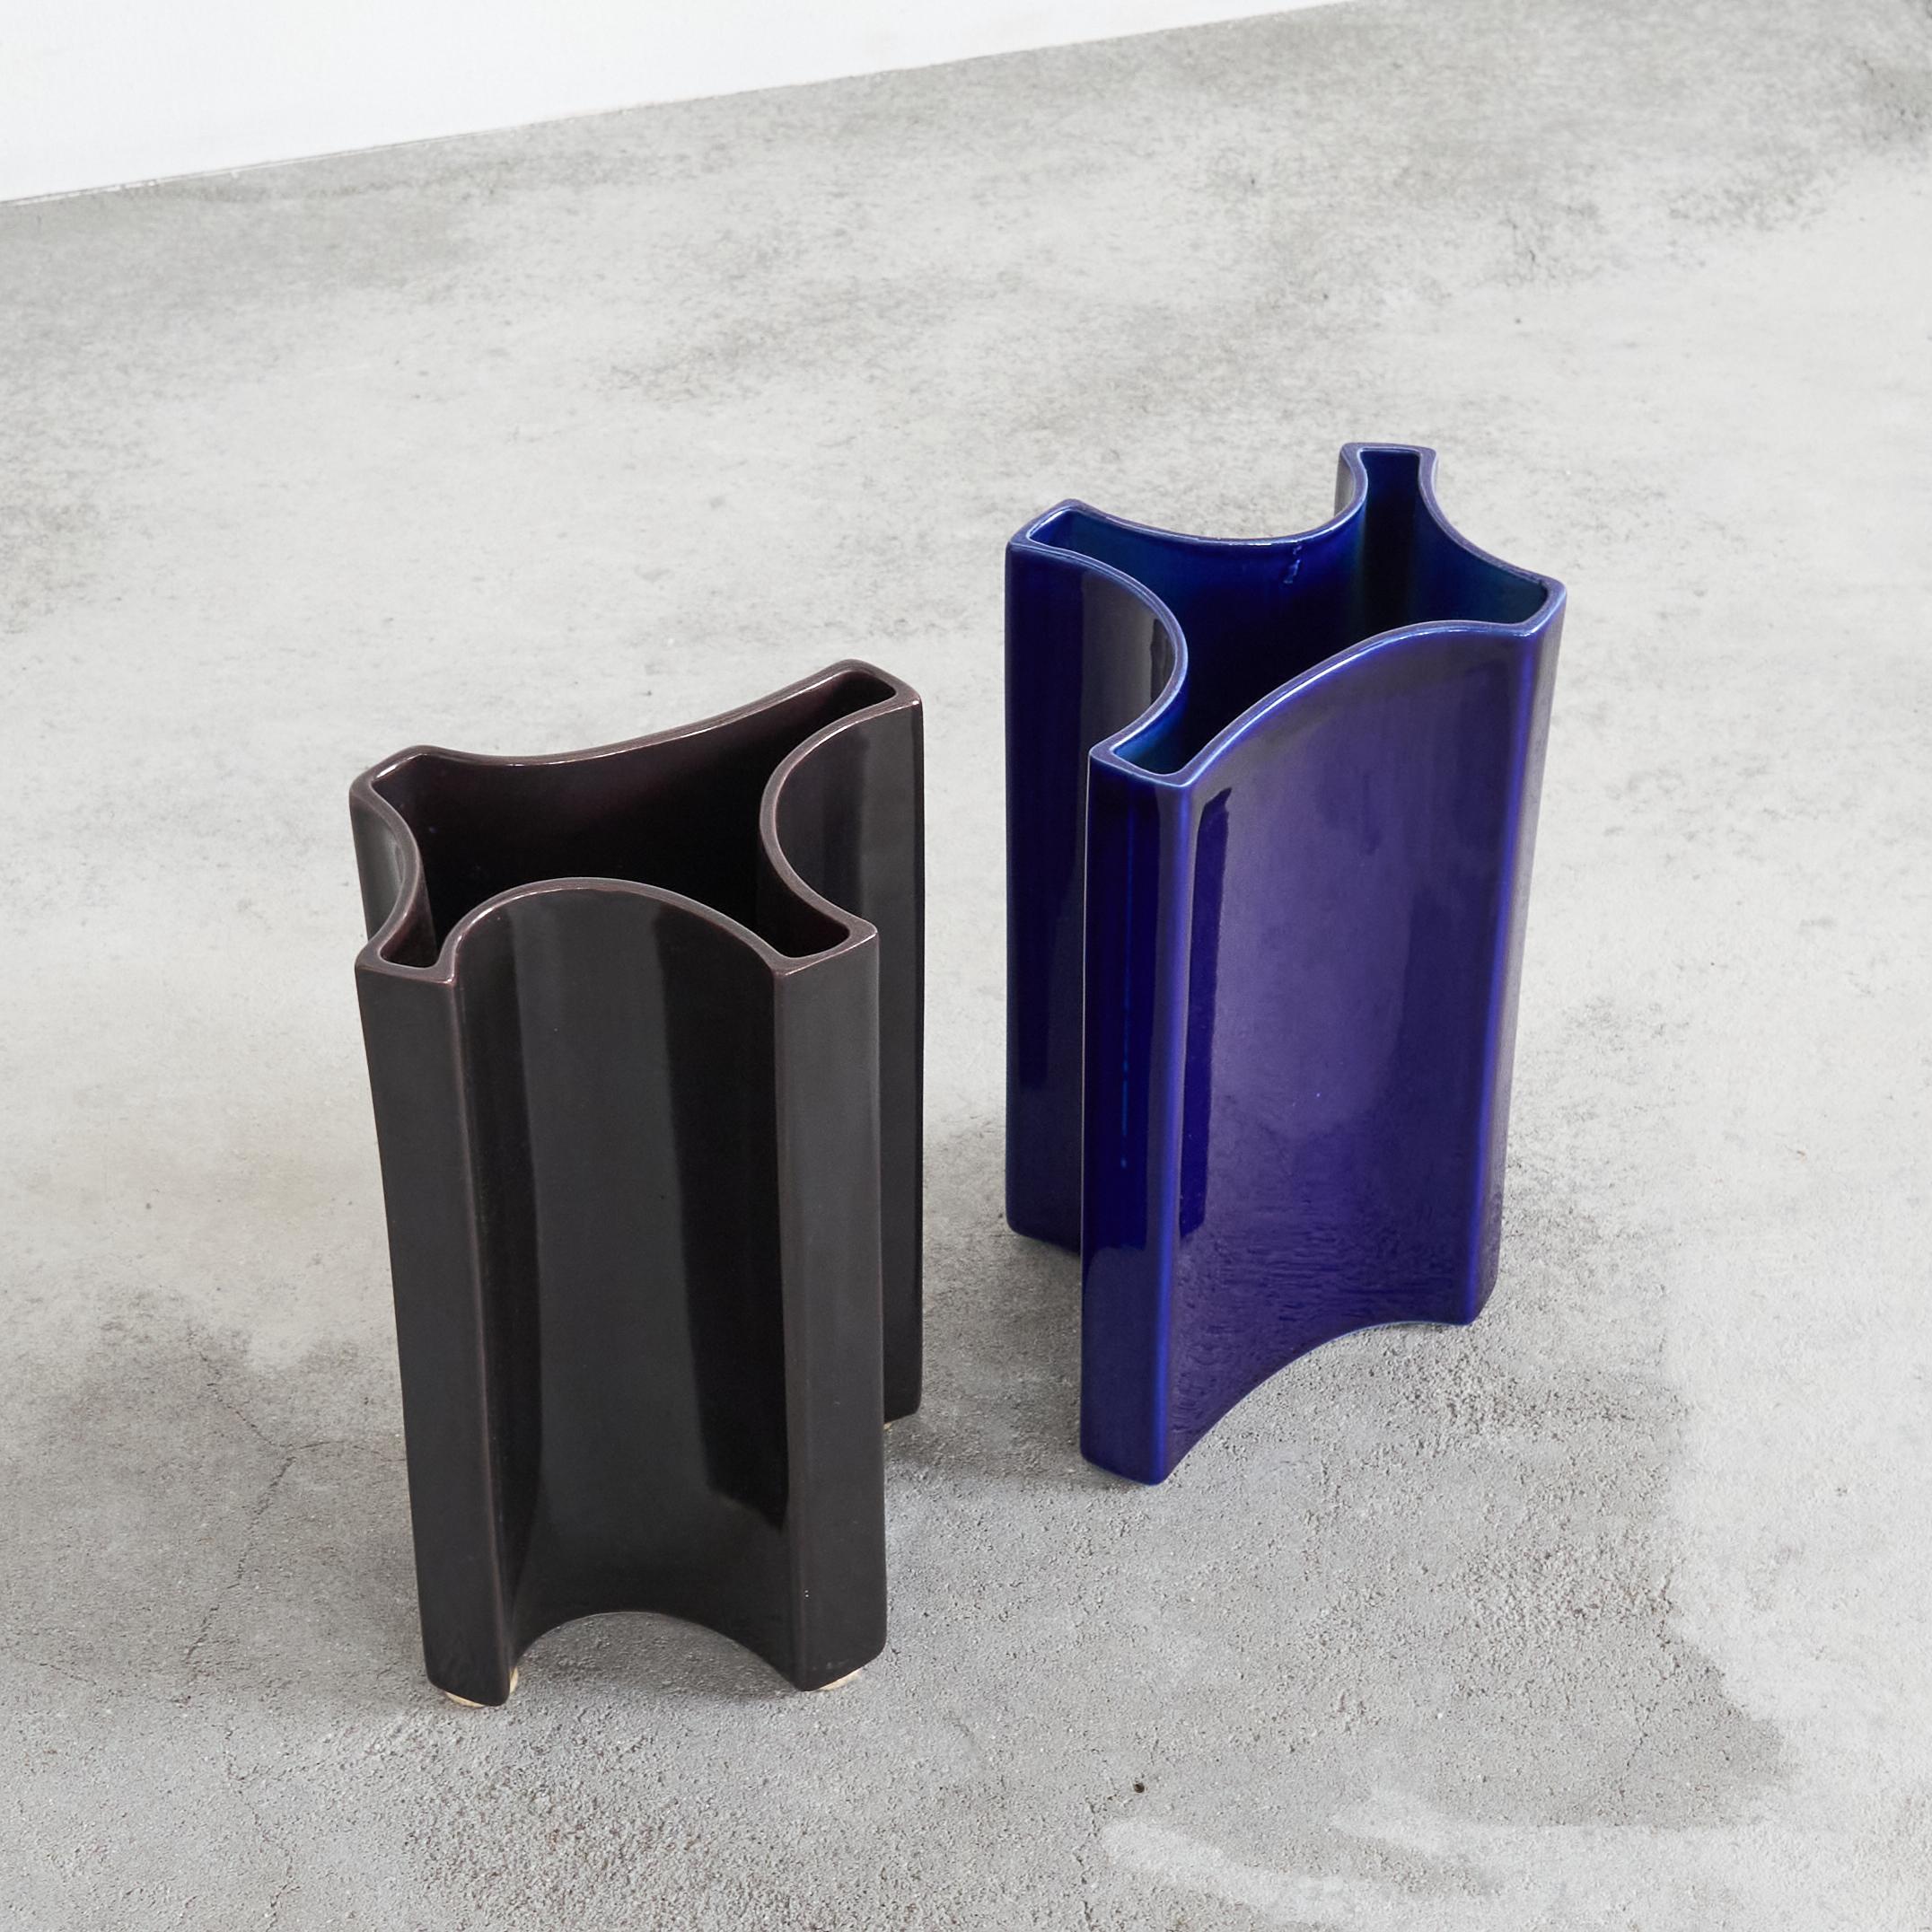 Fantastic pair of freeform vases by Angelo Mangiarotti (1921 – 2012) for Fratelli Brambilla Milano, 1960s, Italy.

Mangiarotti was a multi talented man and one of the great designers of the 20th century. He is known for his marble tables and